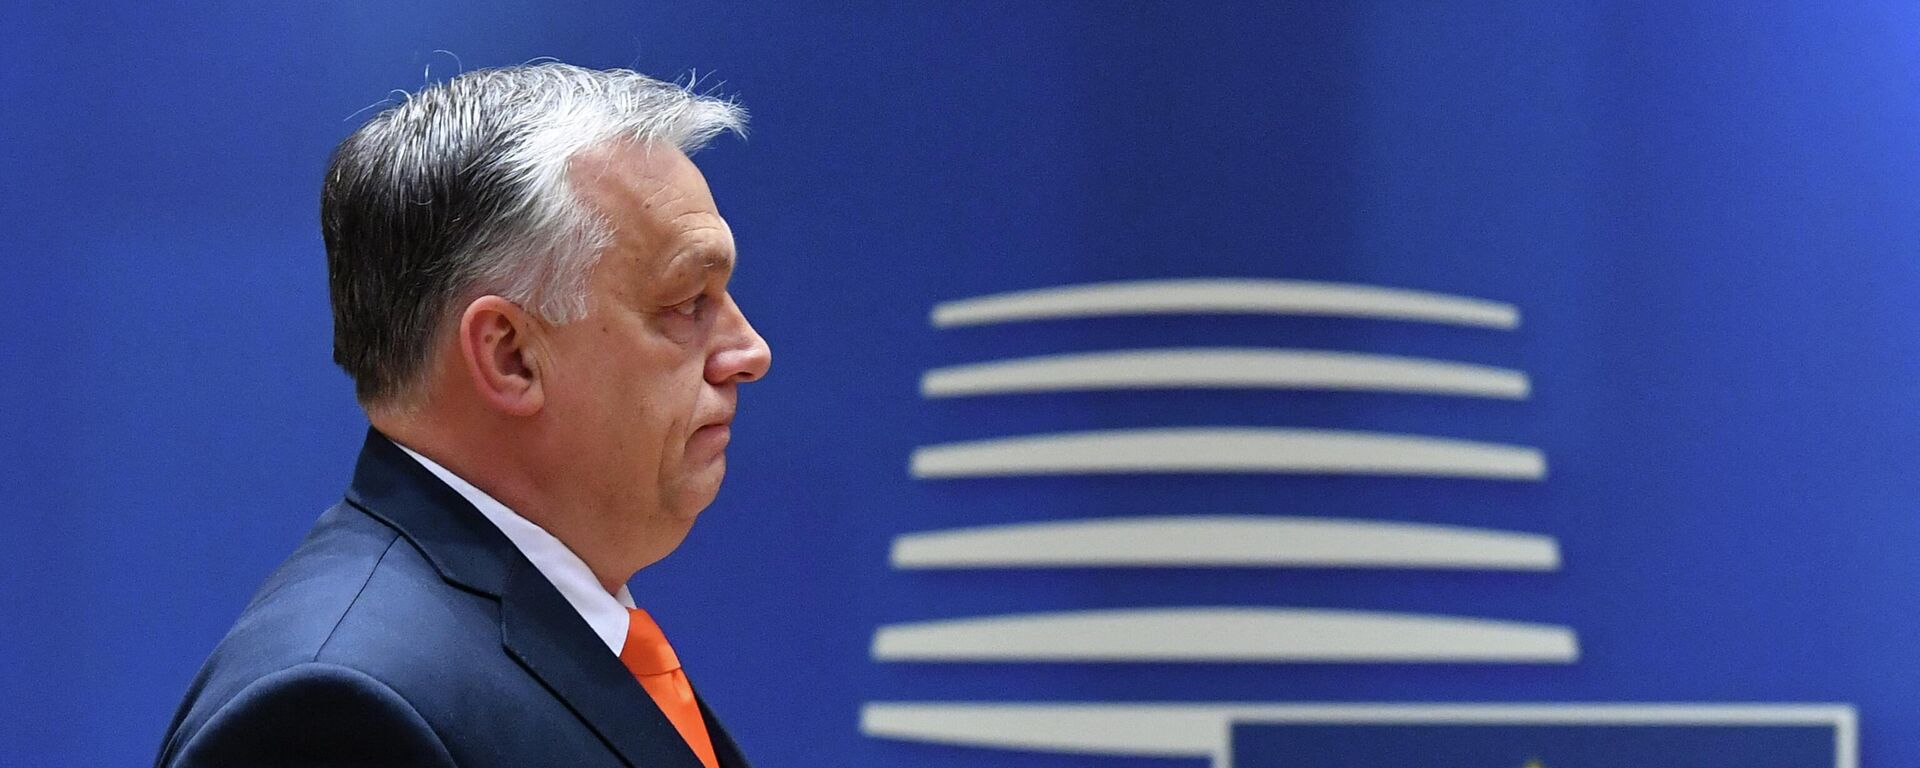 Hungary's Prime Minister Viktor Orban arrives for a meeting as part of a European Union (EU) summit at EU Headquarters in Brussels on March 25, 2022. - Sputnik International, 1920, 04.06.2022